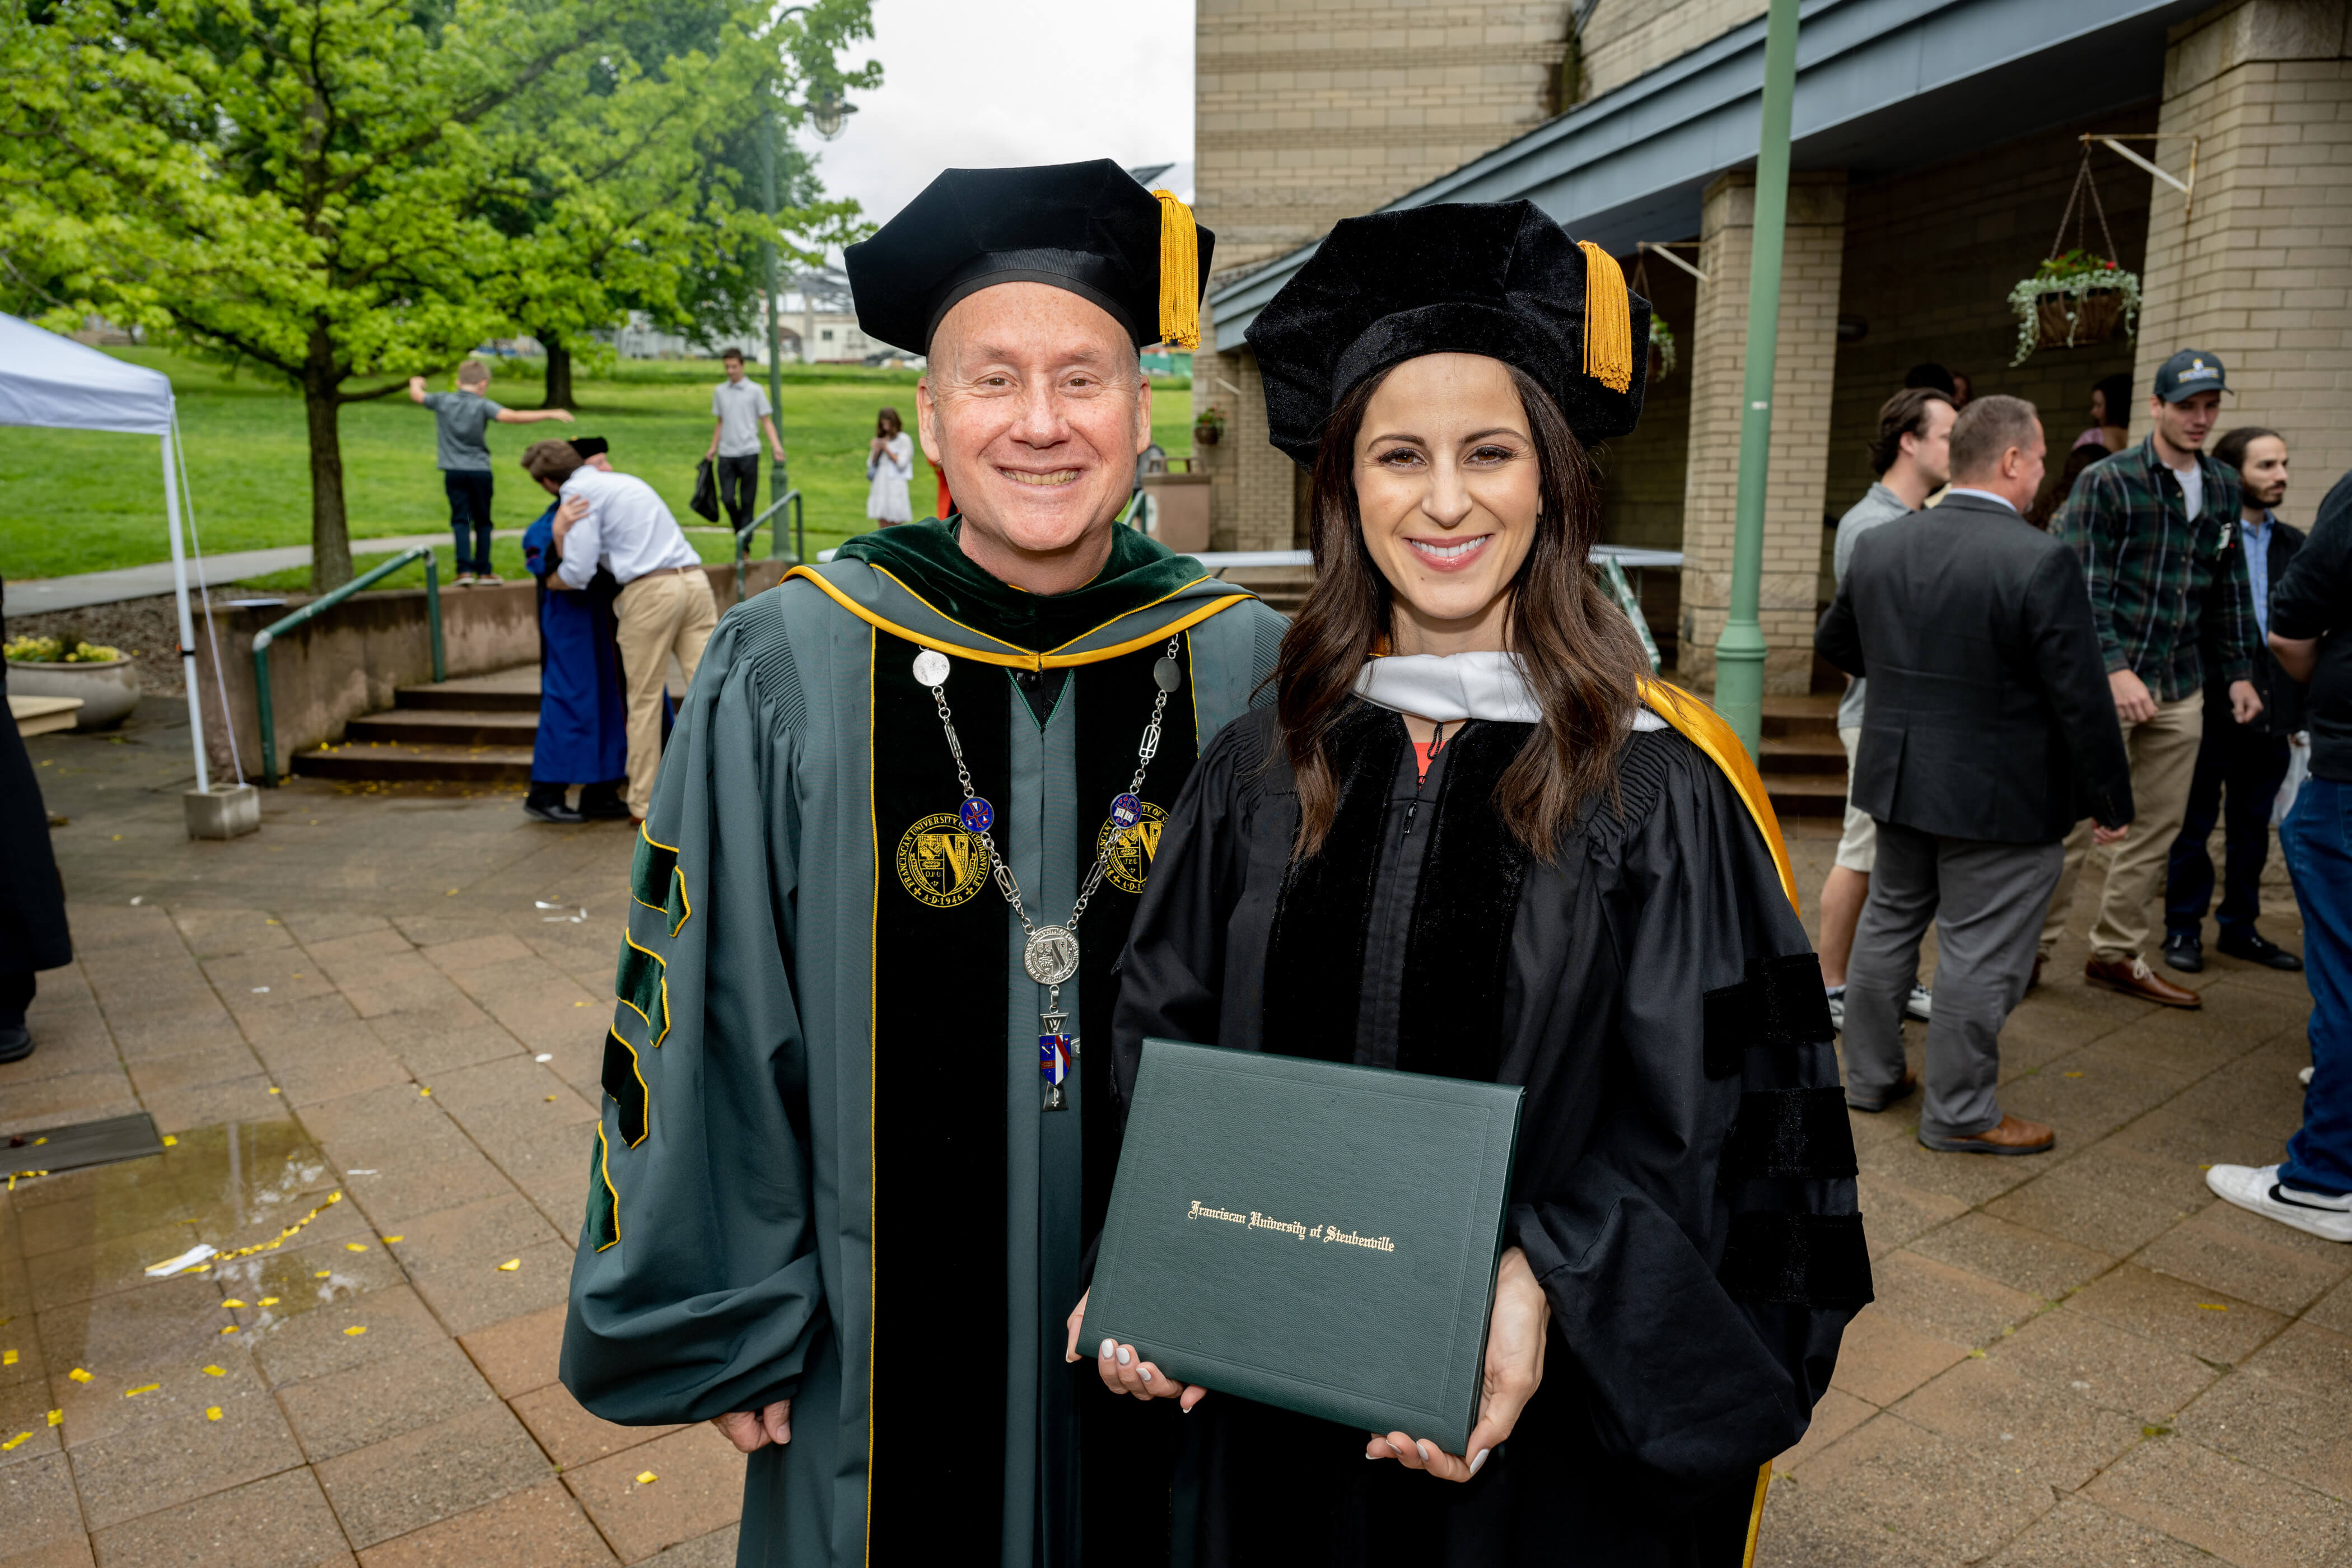 Fr. Dave Pivonka, TOR ’89, president of Franciscan University, with Lila Rose, founder and president of Live Action and recipient of an honorary doctorate in Christian ethics. 